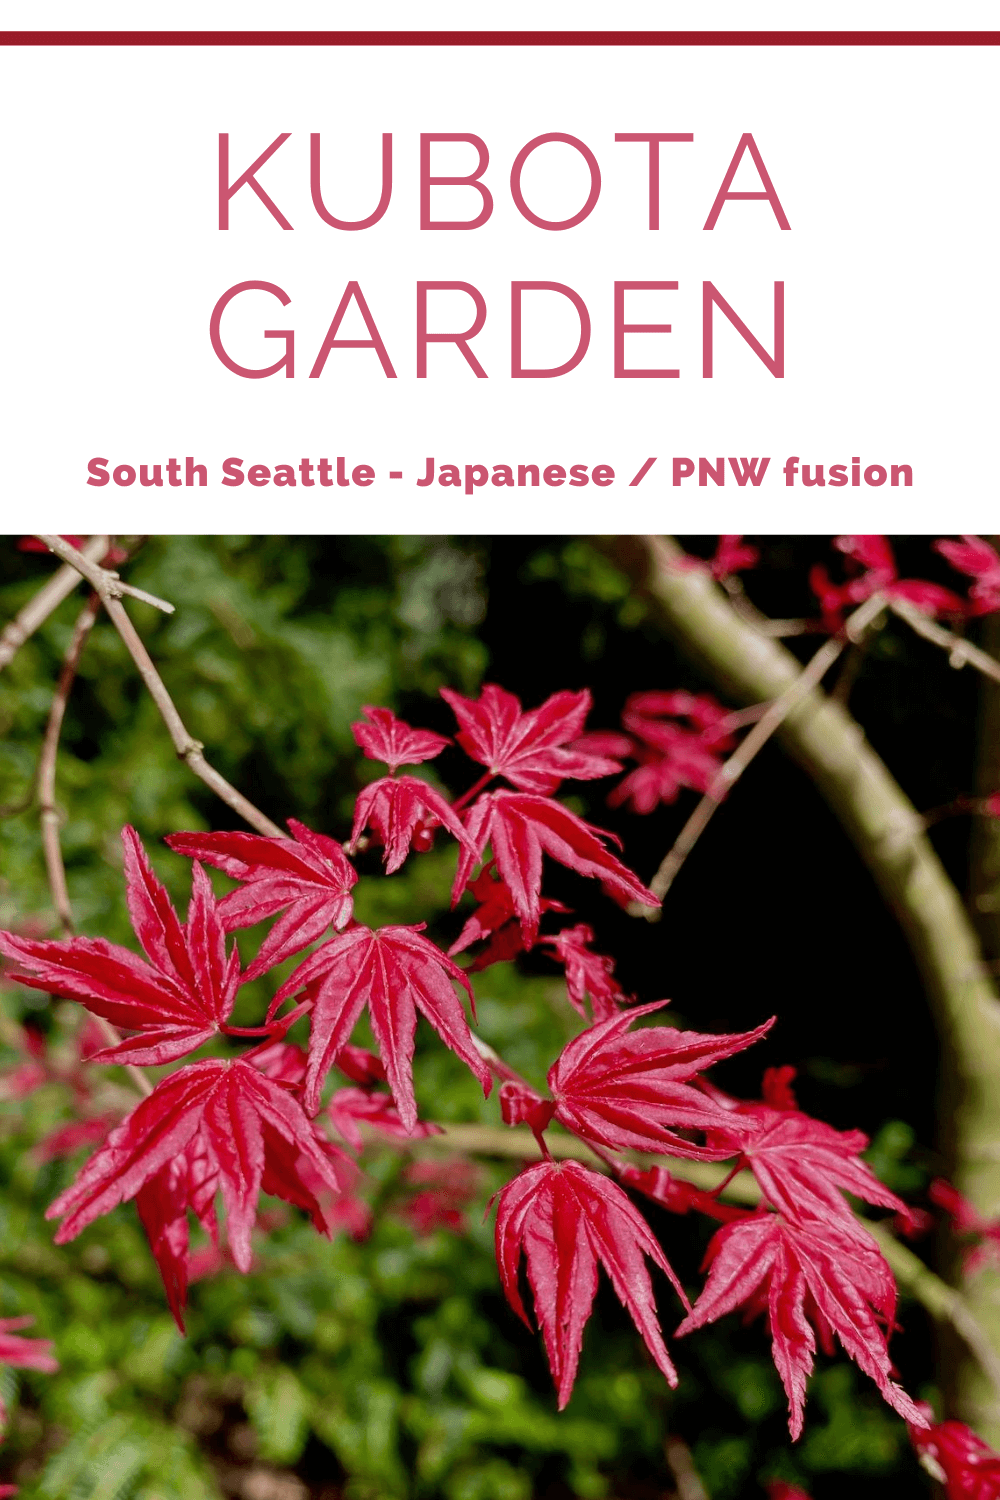 Kubota Garden in Seattle is a wonderful example of Japanese and Pacific Northwest fusion of plants, like this branch of maple tree just beginning new spring leaves that are fire bright red.